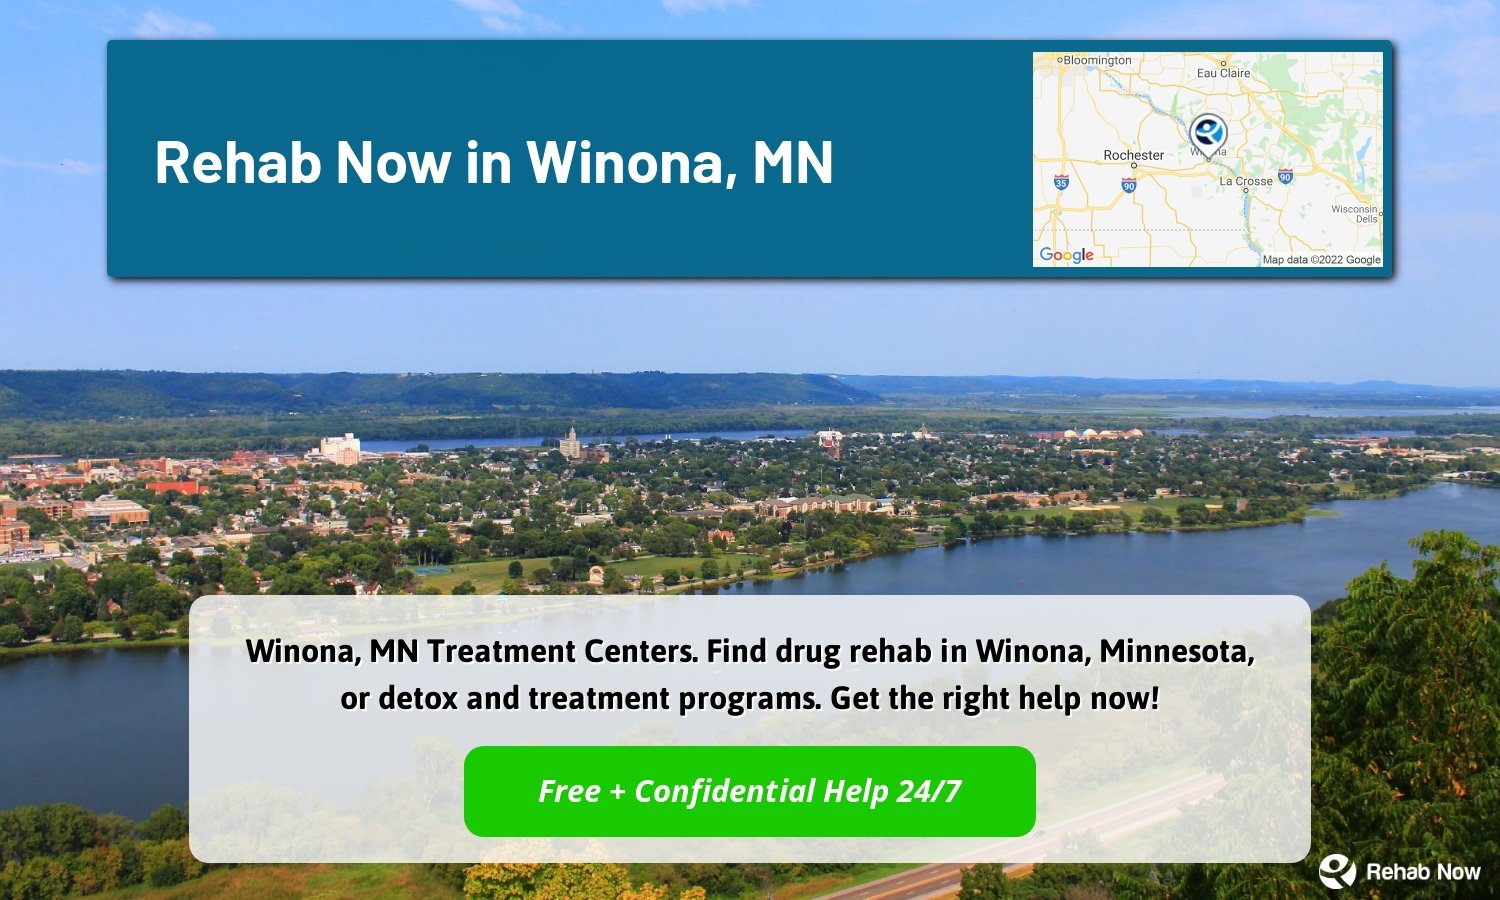 Winona, MN Treatment Centers. Find drug rehab in Winona, Minnesota, or detox and treatment programs. Get the right help now!